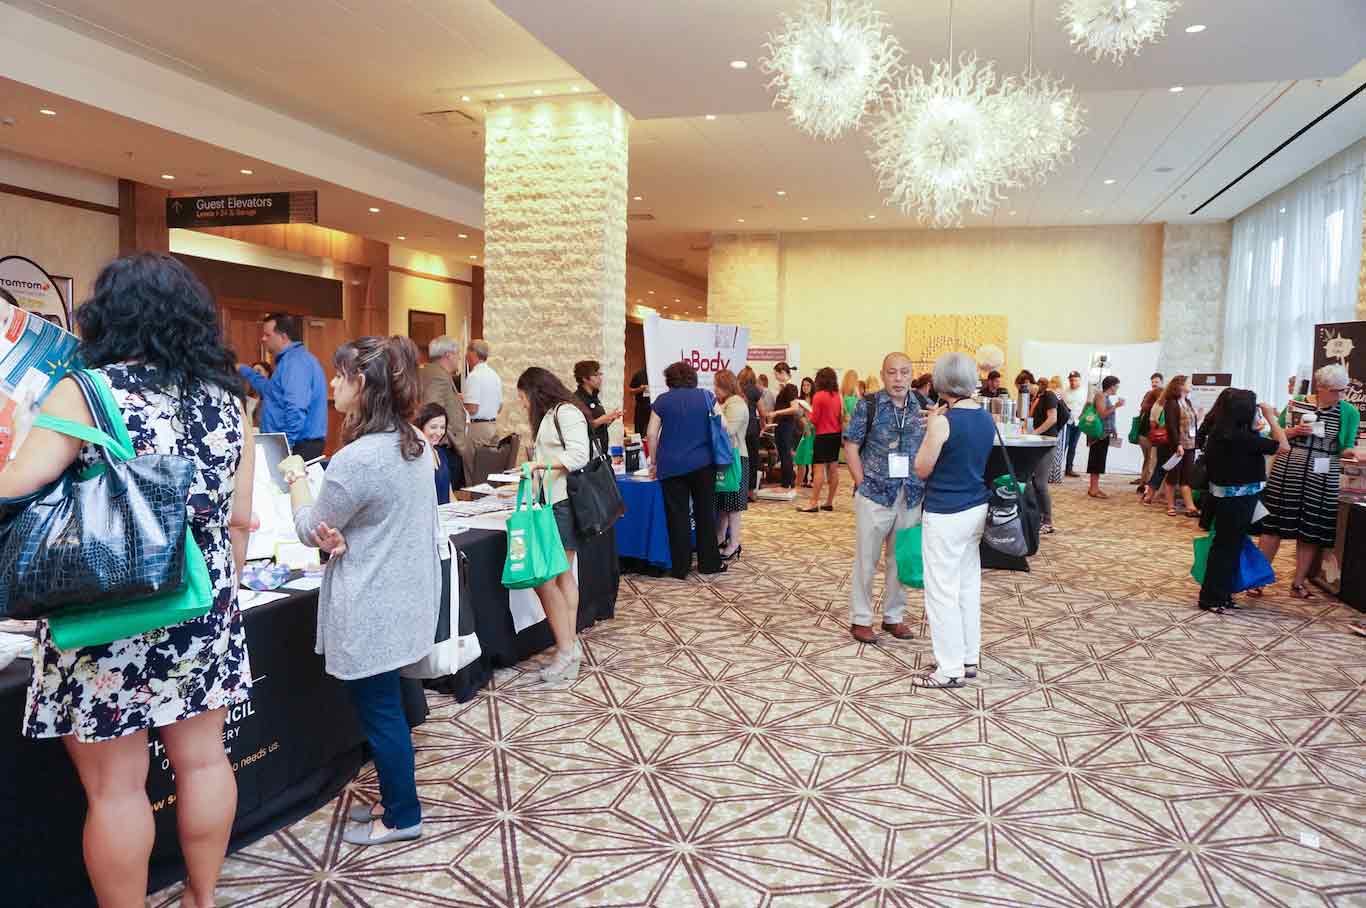 The exhibit hall during the Healthier Texas Summit